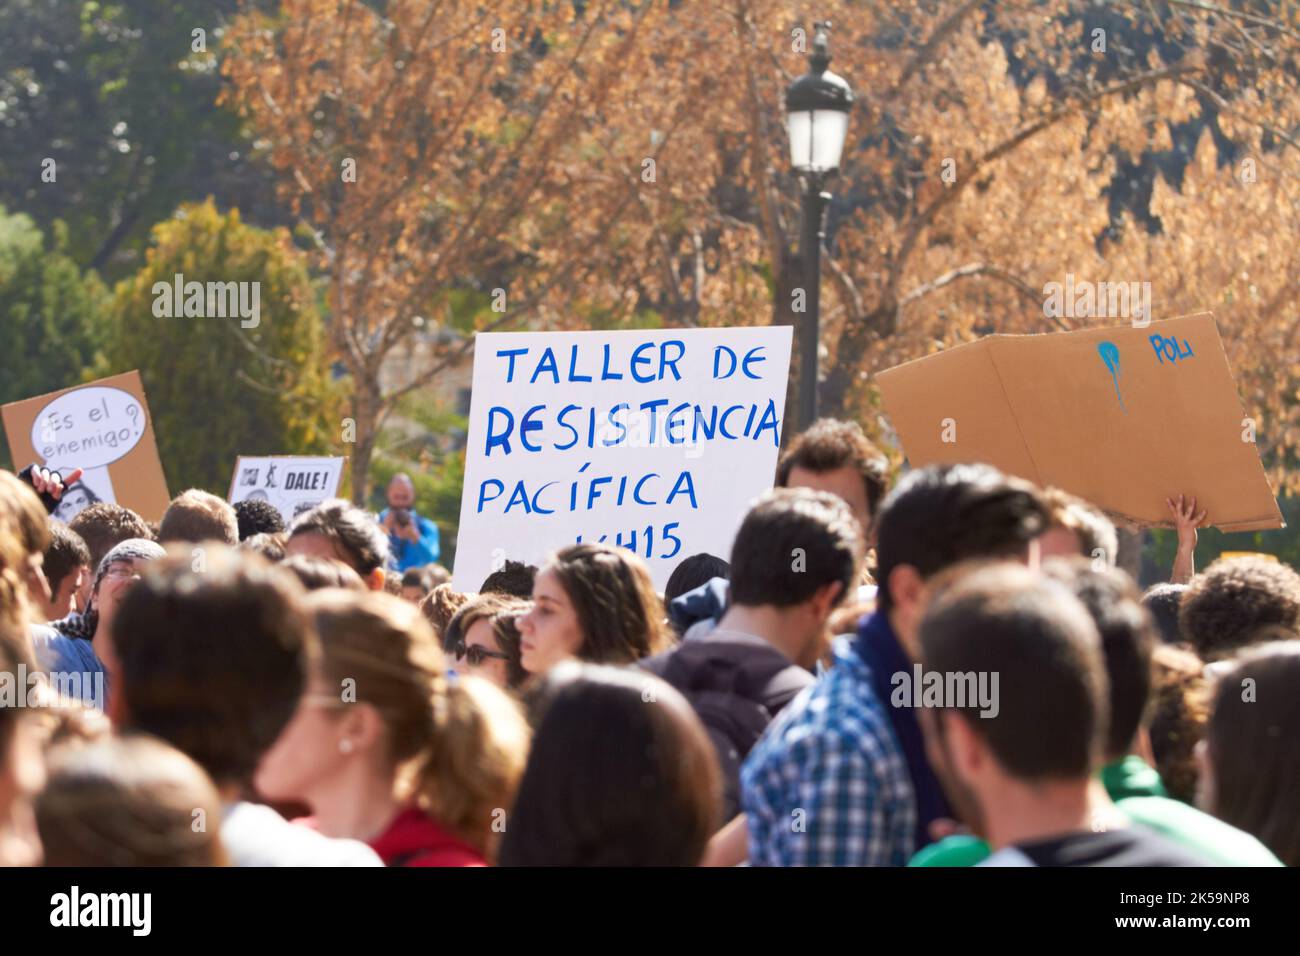 Resistencia. a large group of protesters outdoors with placards. Stock Photo